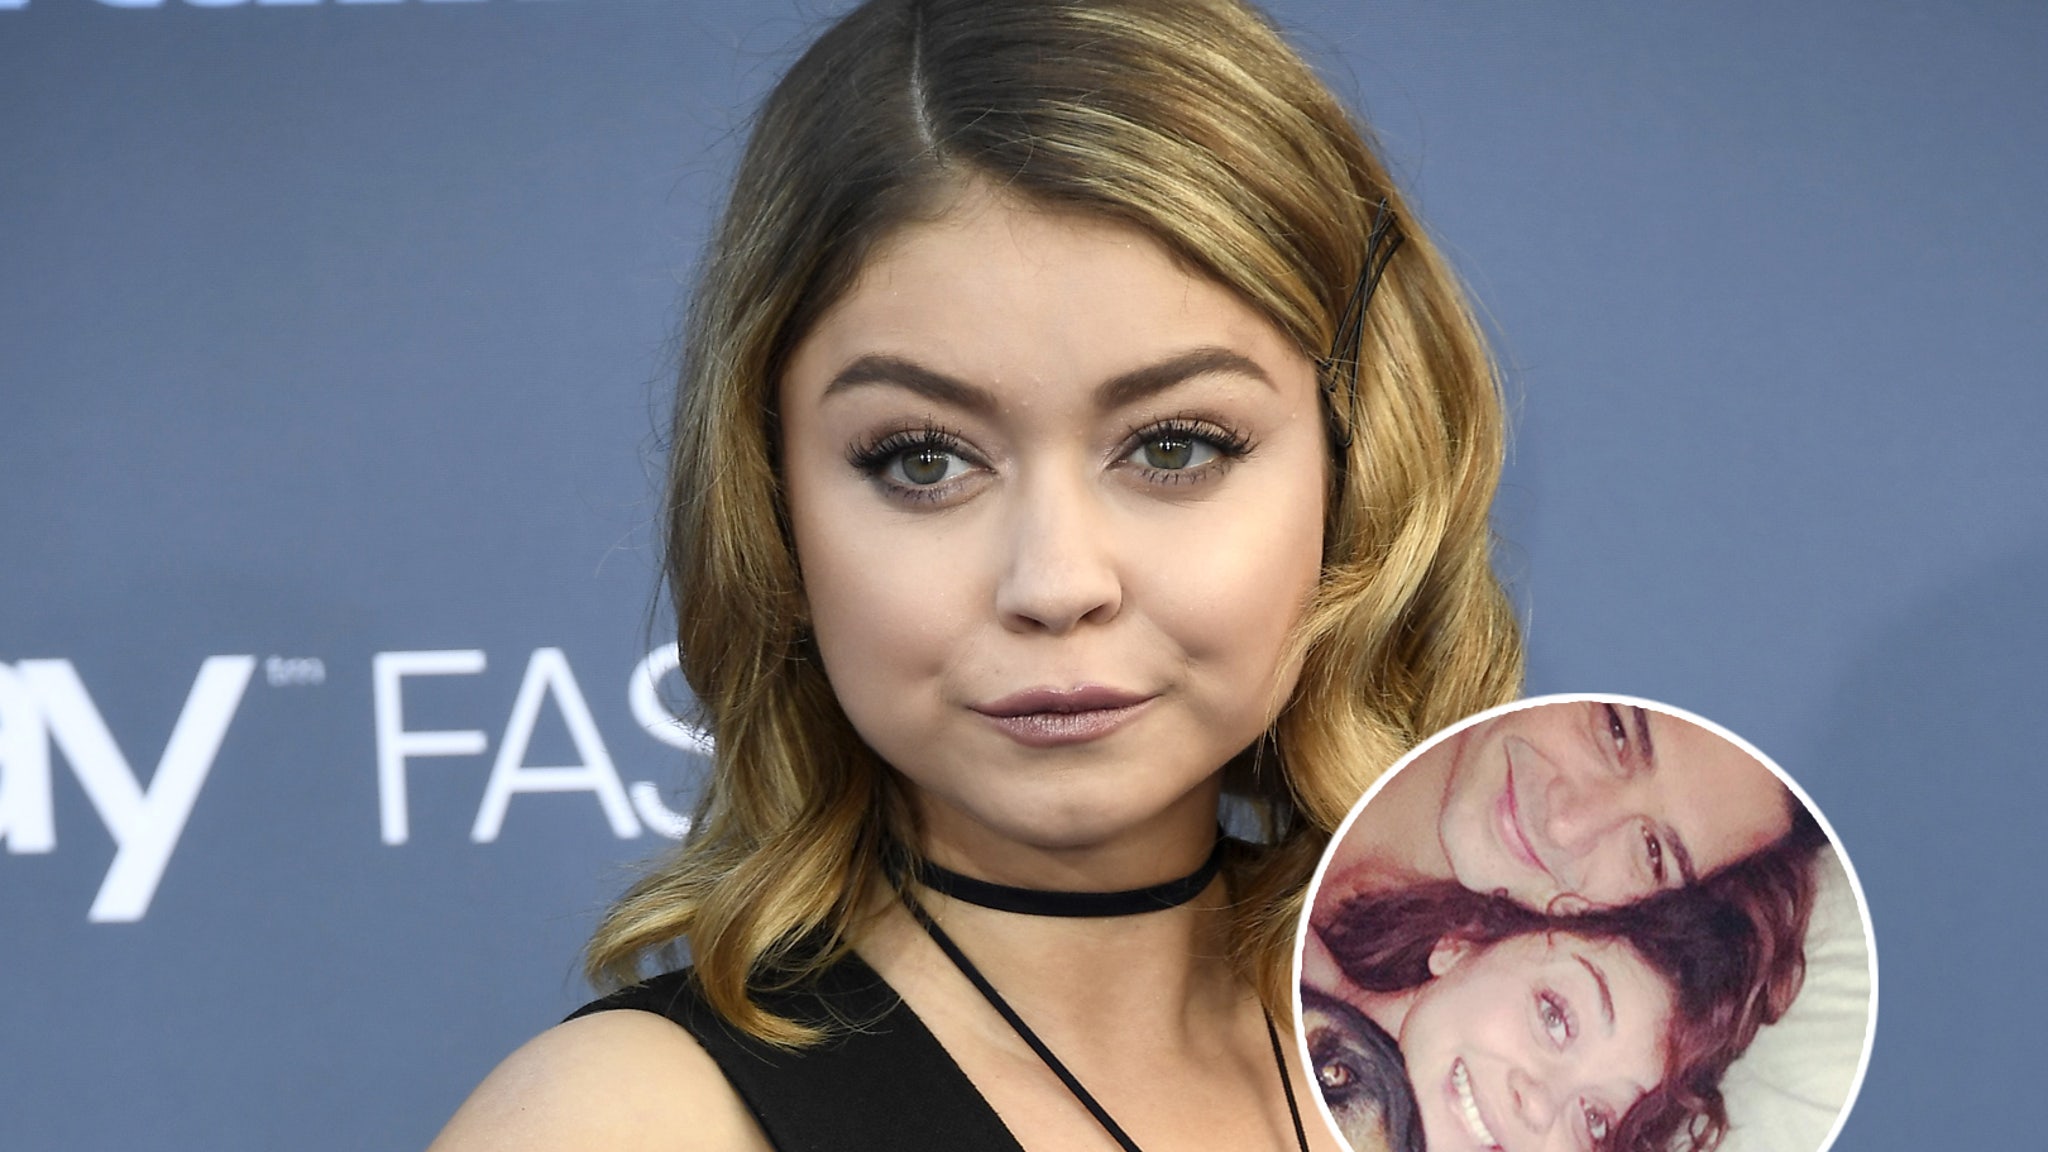 Sarah Hyland Porn - Sarah Hyland Claps Back at Angry Fan Demanding 'KEEP YOUR SEXUAL LIFE  PRIVATE'